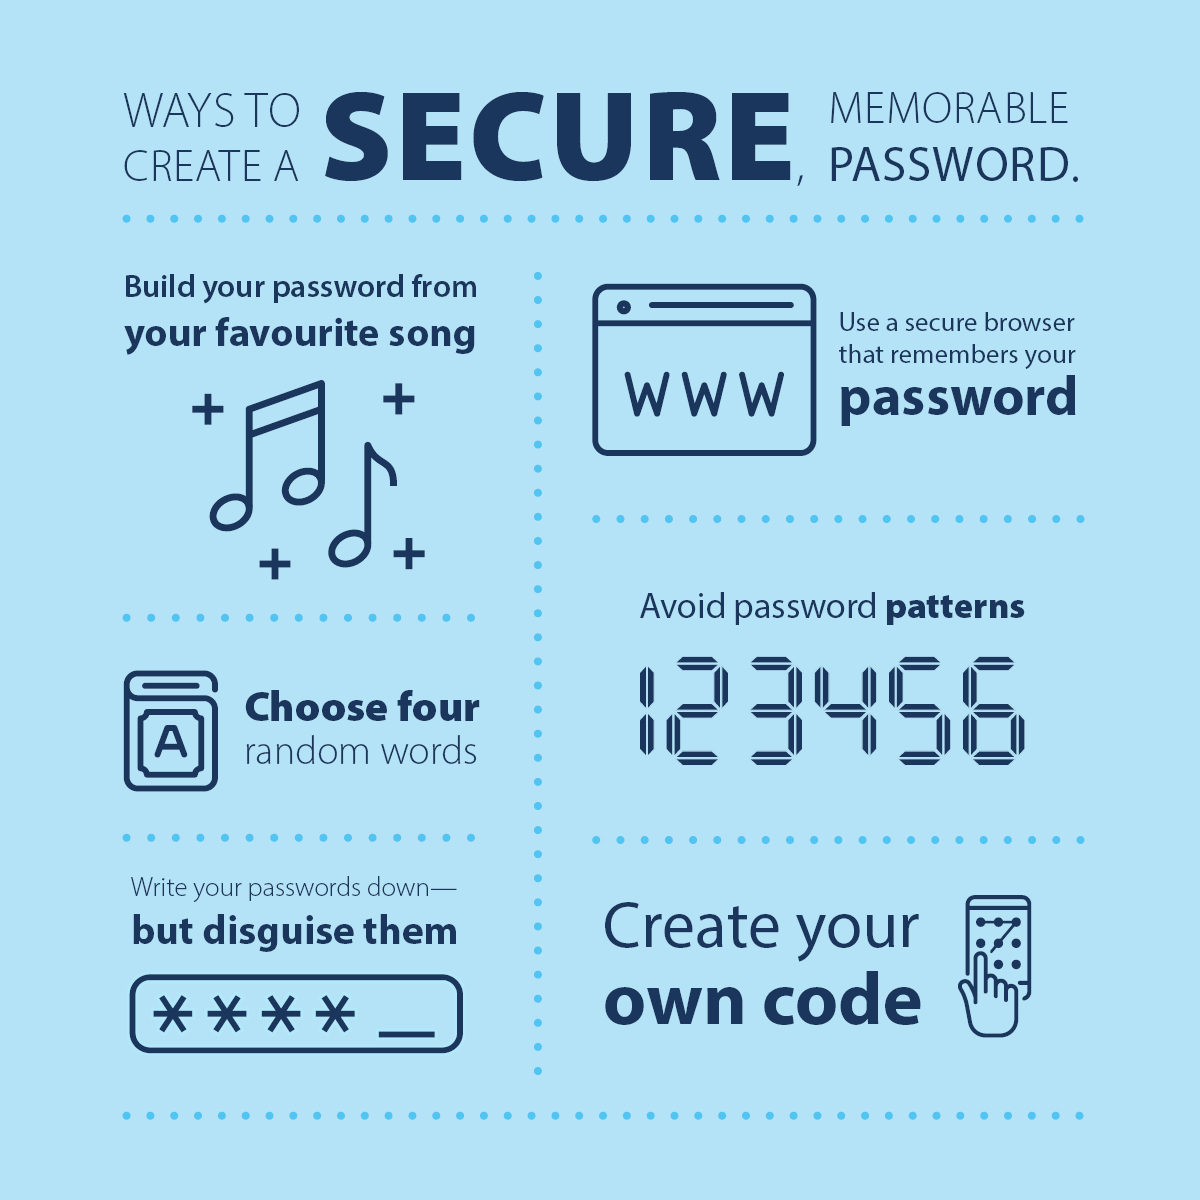 An infographic images providing tips on how to create a secure password. Tips include lyrics from a favourite song, choosing four random words, if you have to write them down disguise them, use a browser that stores passwords, avoid typical patterns such as 123456 and finally creating a passcode pattern